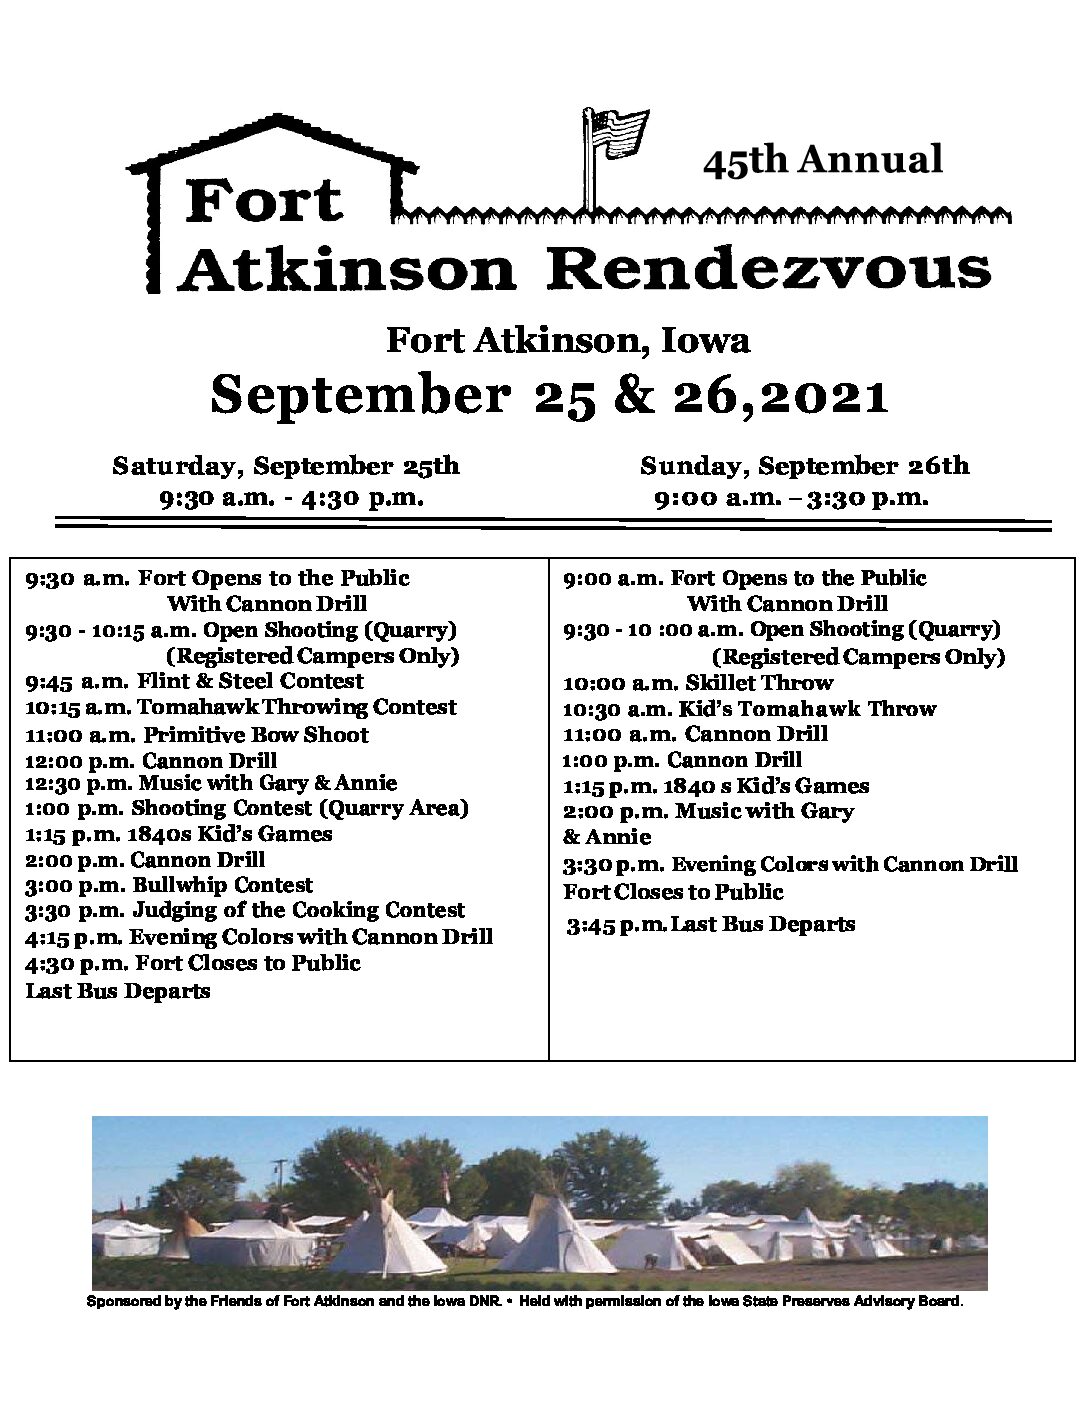 45th Annual Fort Atkinson Rendezvous thumbnail